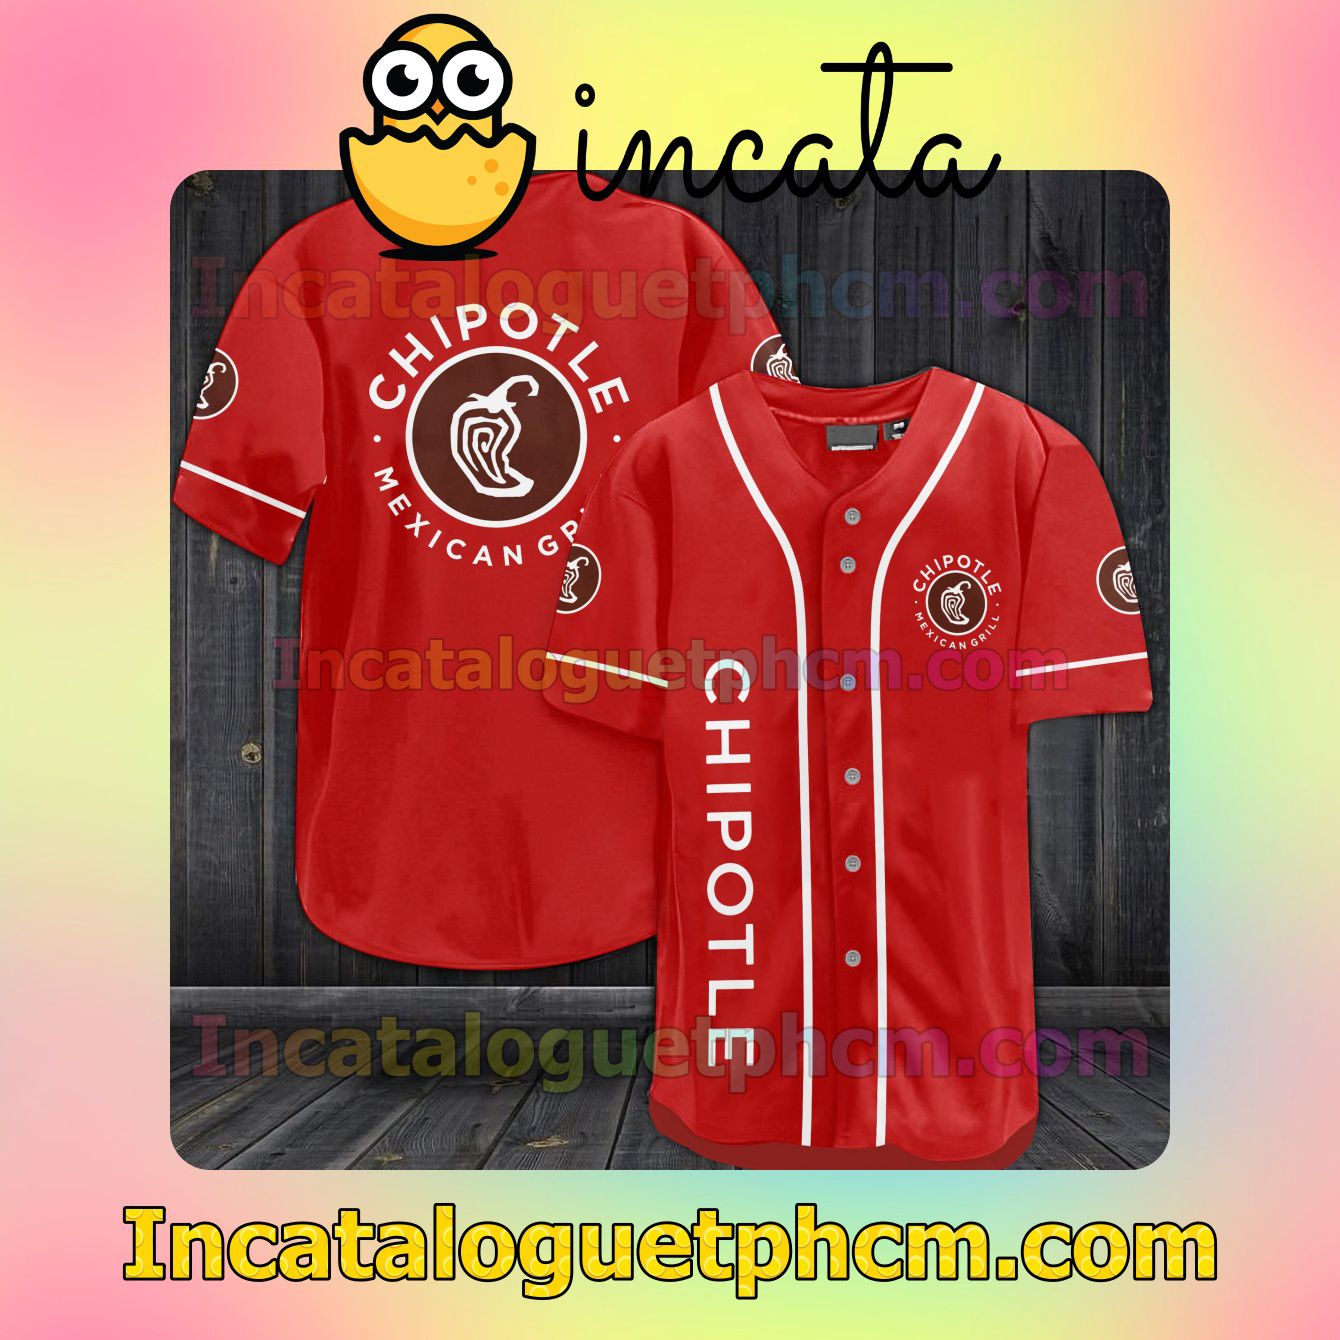 Chipotle Mexican Grill Baseball Jersey Shirt